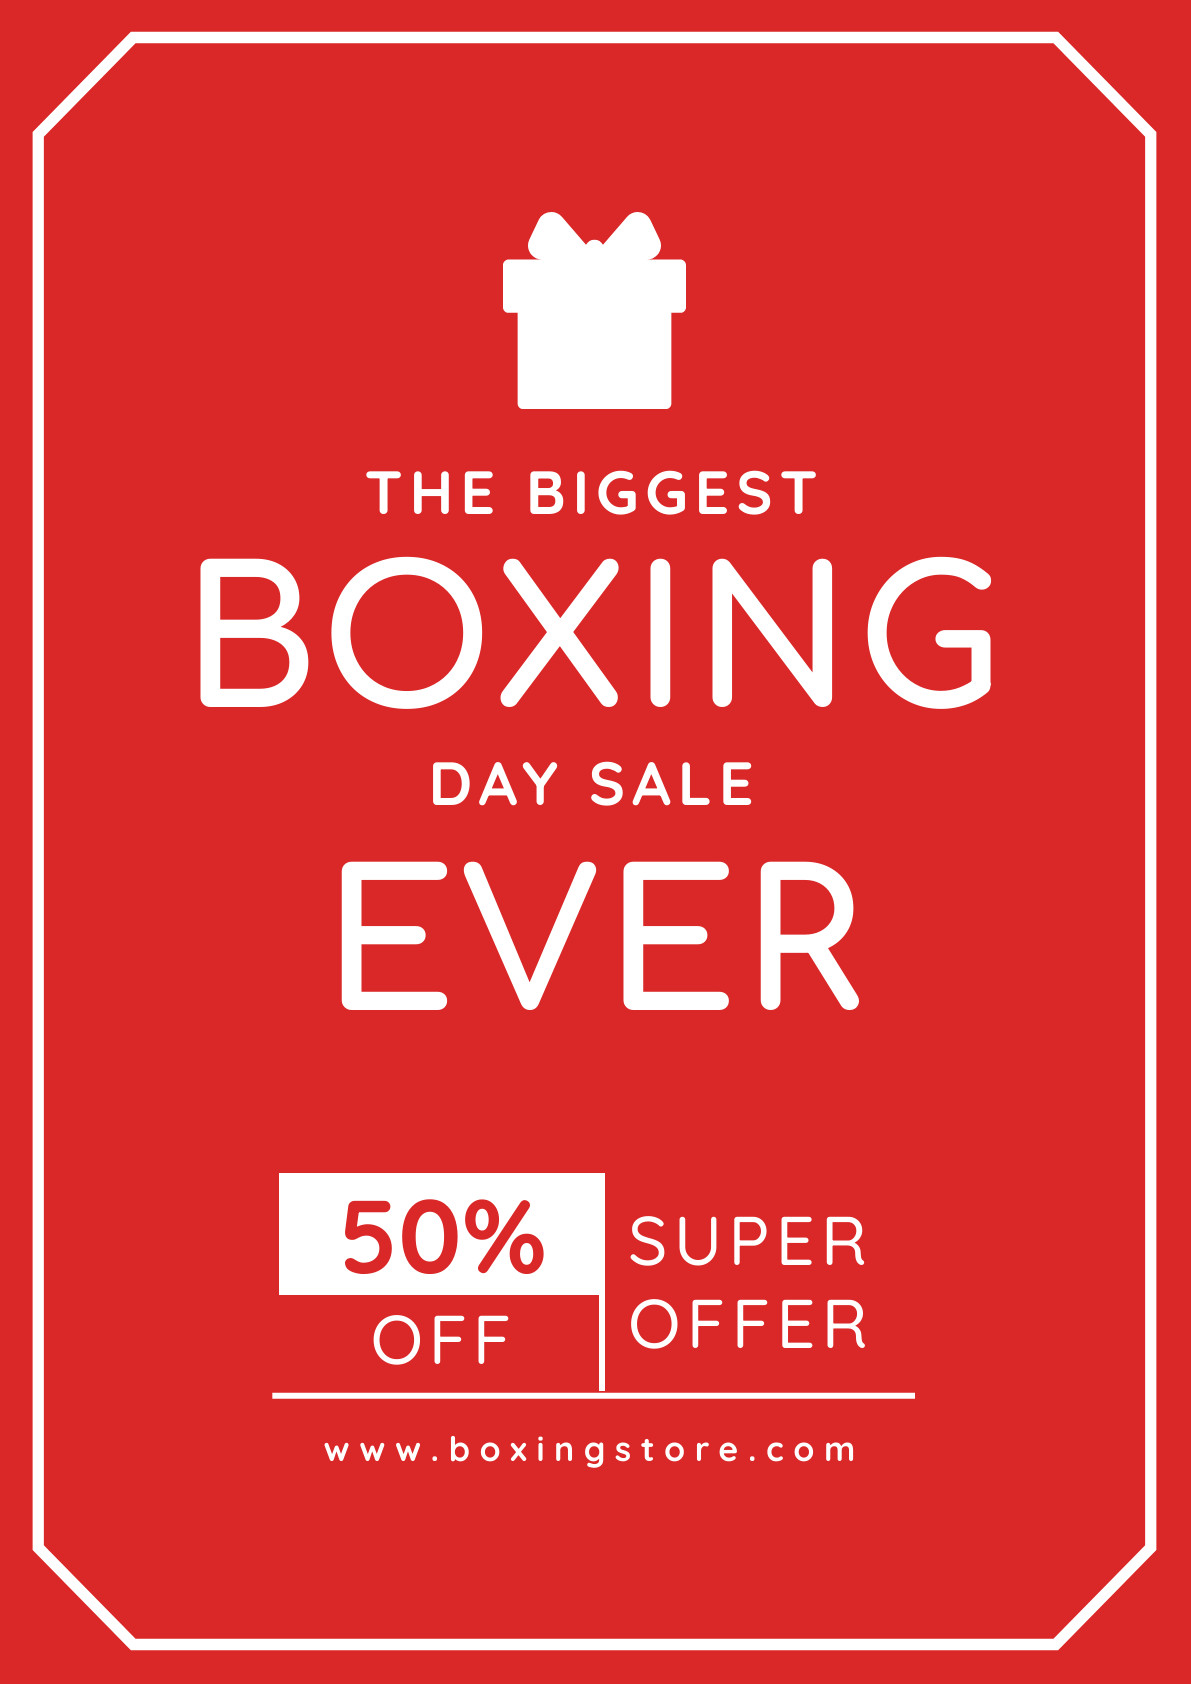 The Biggest Boxing Day Sale Ever Poster 1191x1684